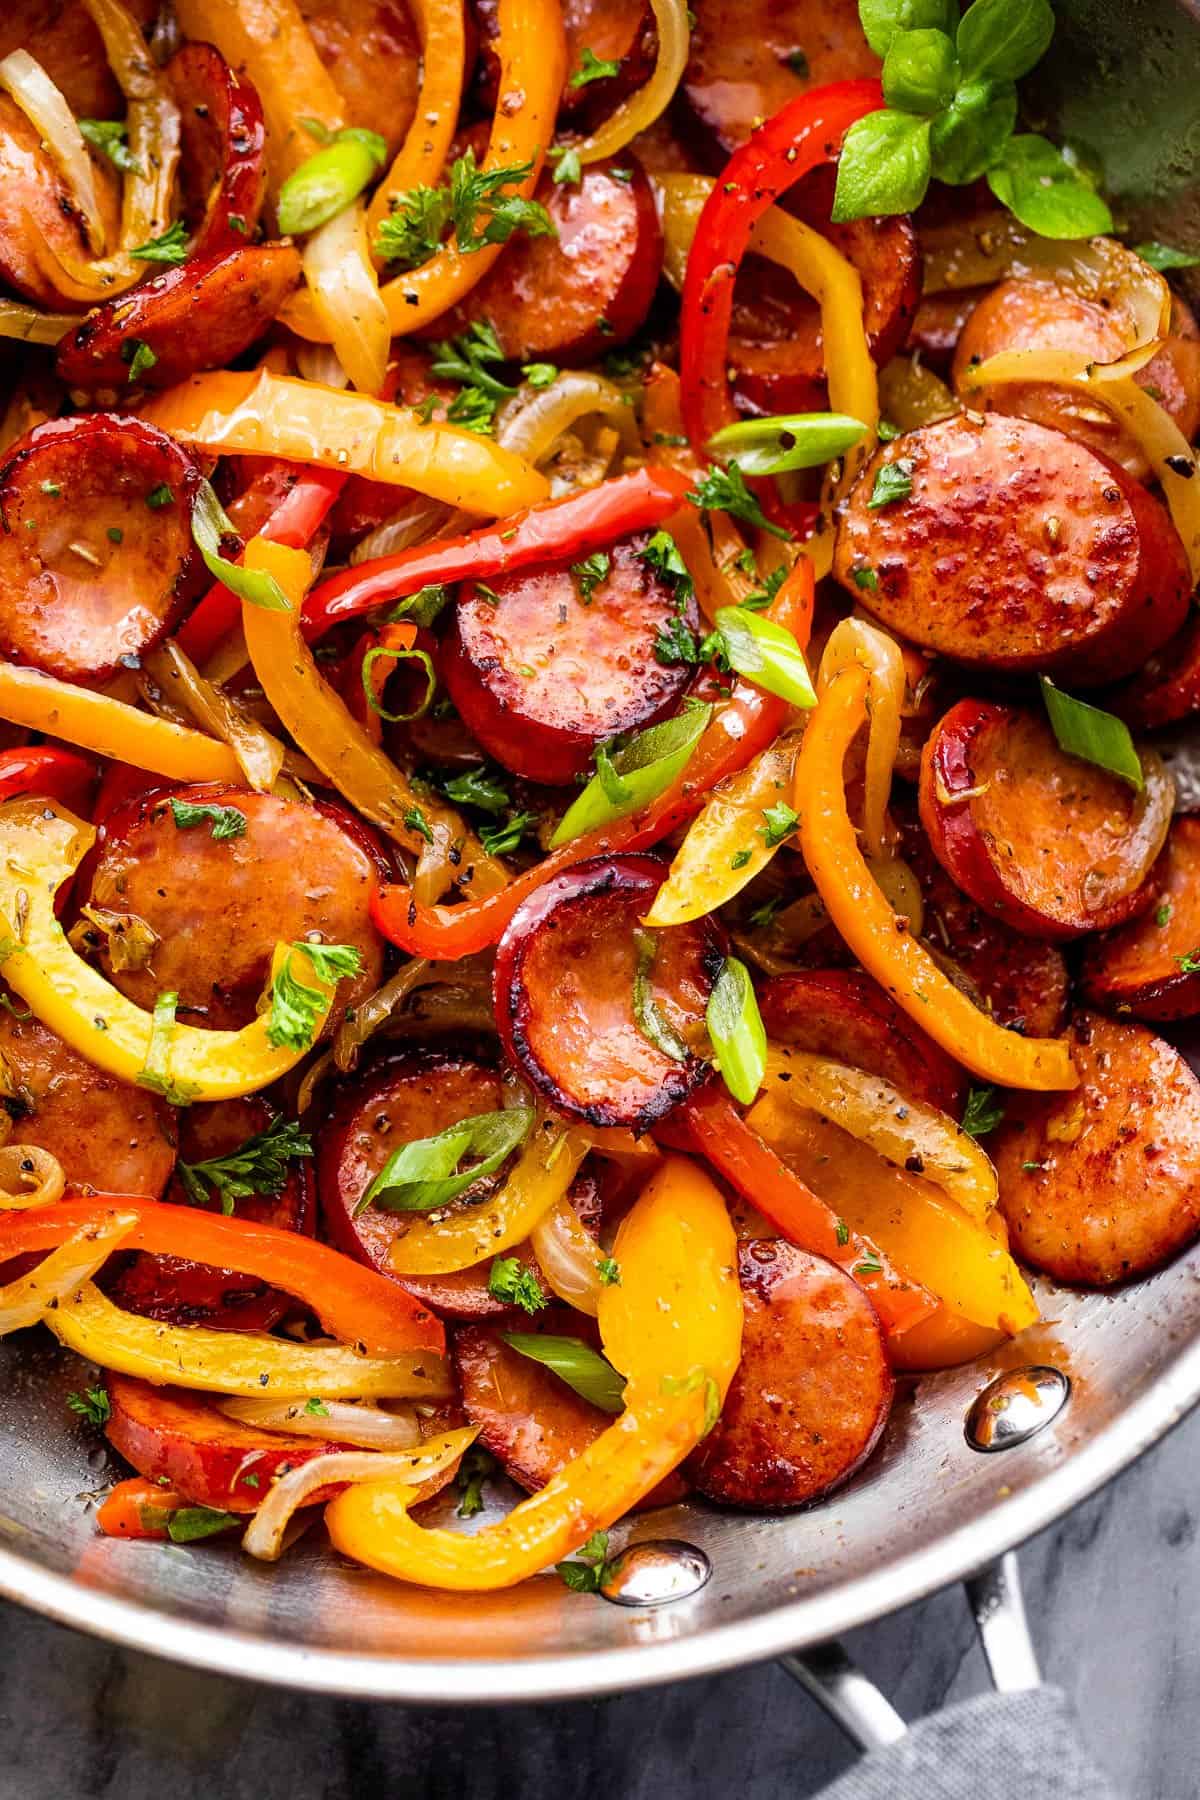 Close-up photo of sliced bell peppers, andouille sausage slices, and onions in a skillet.